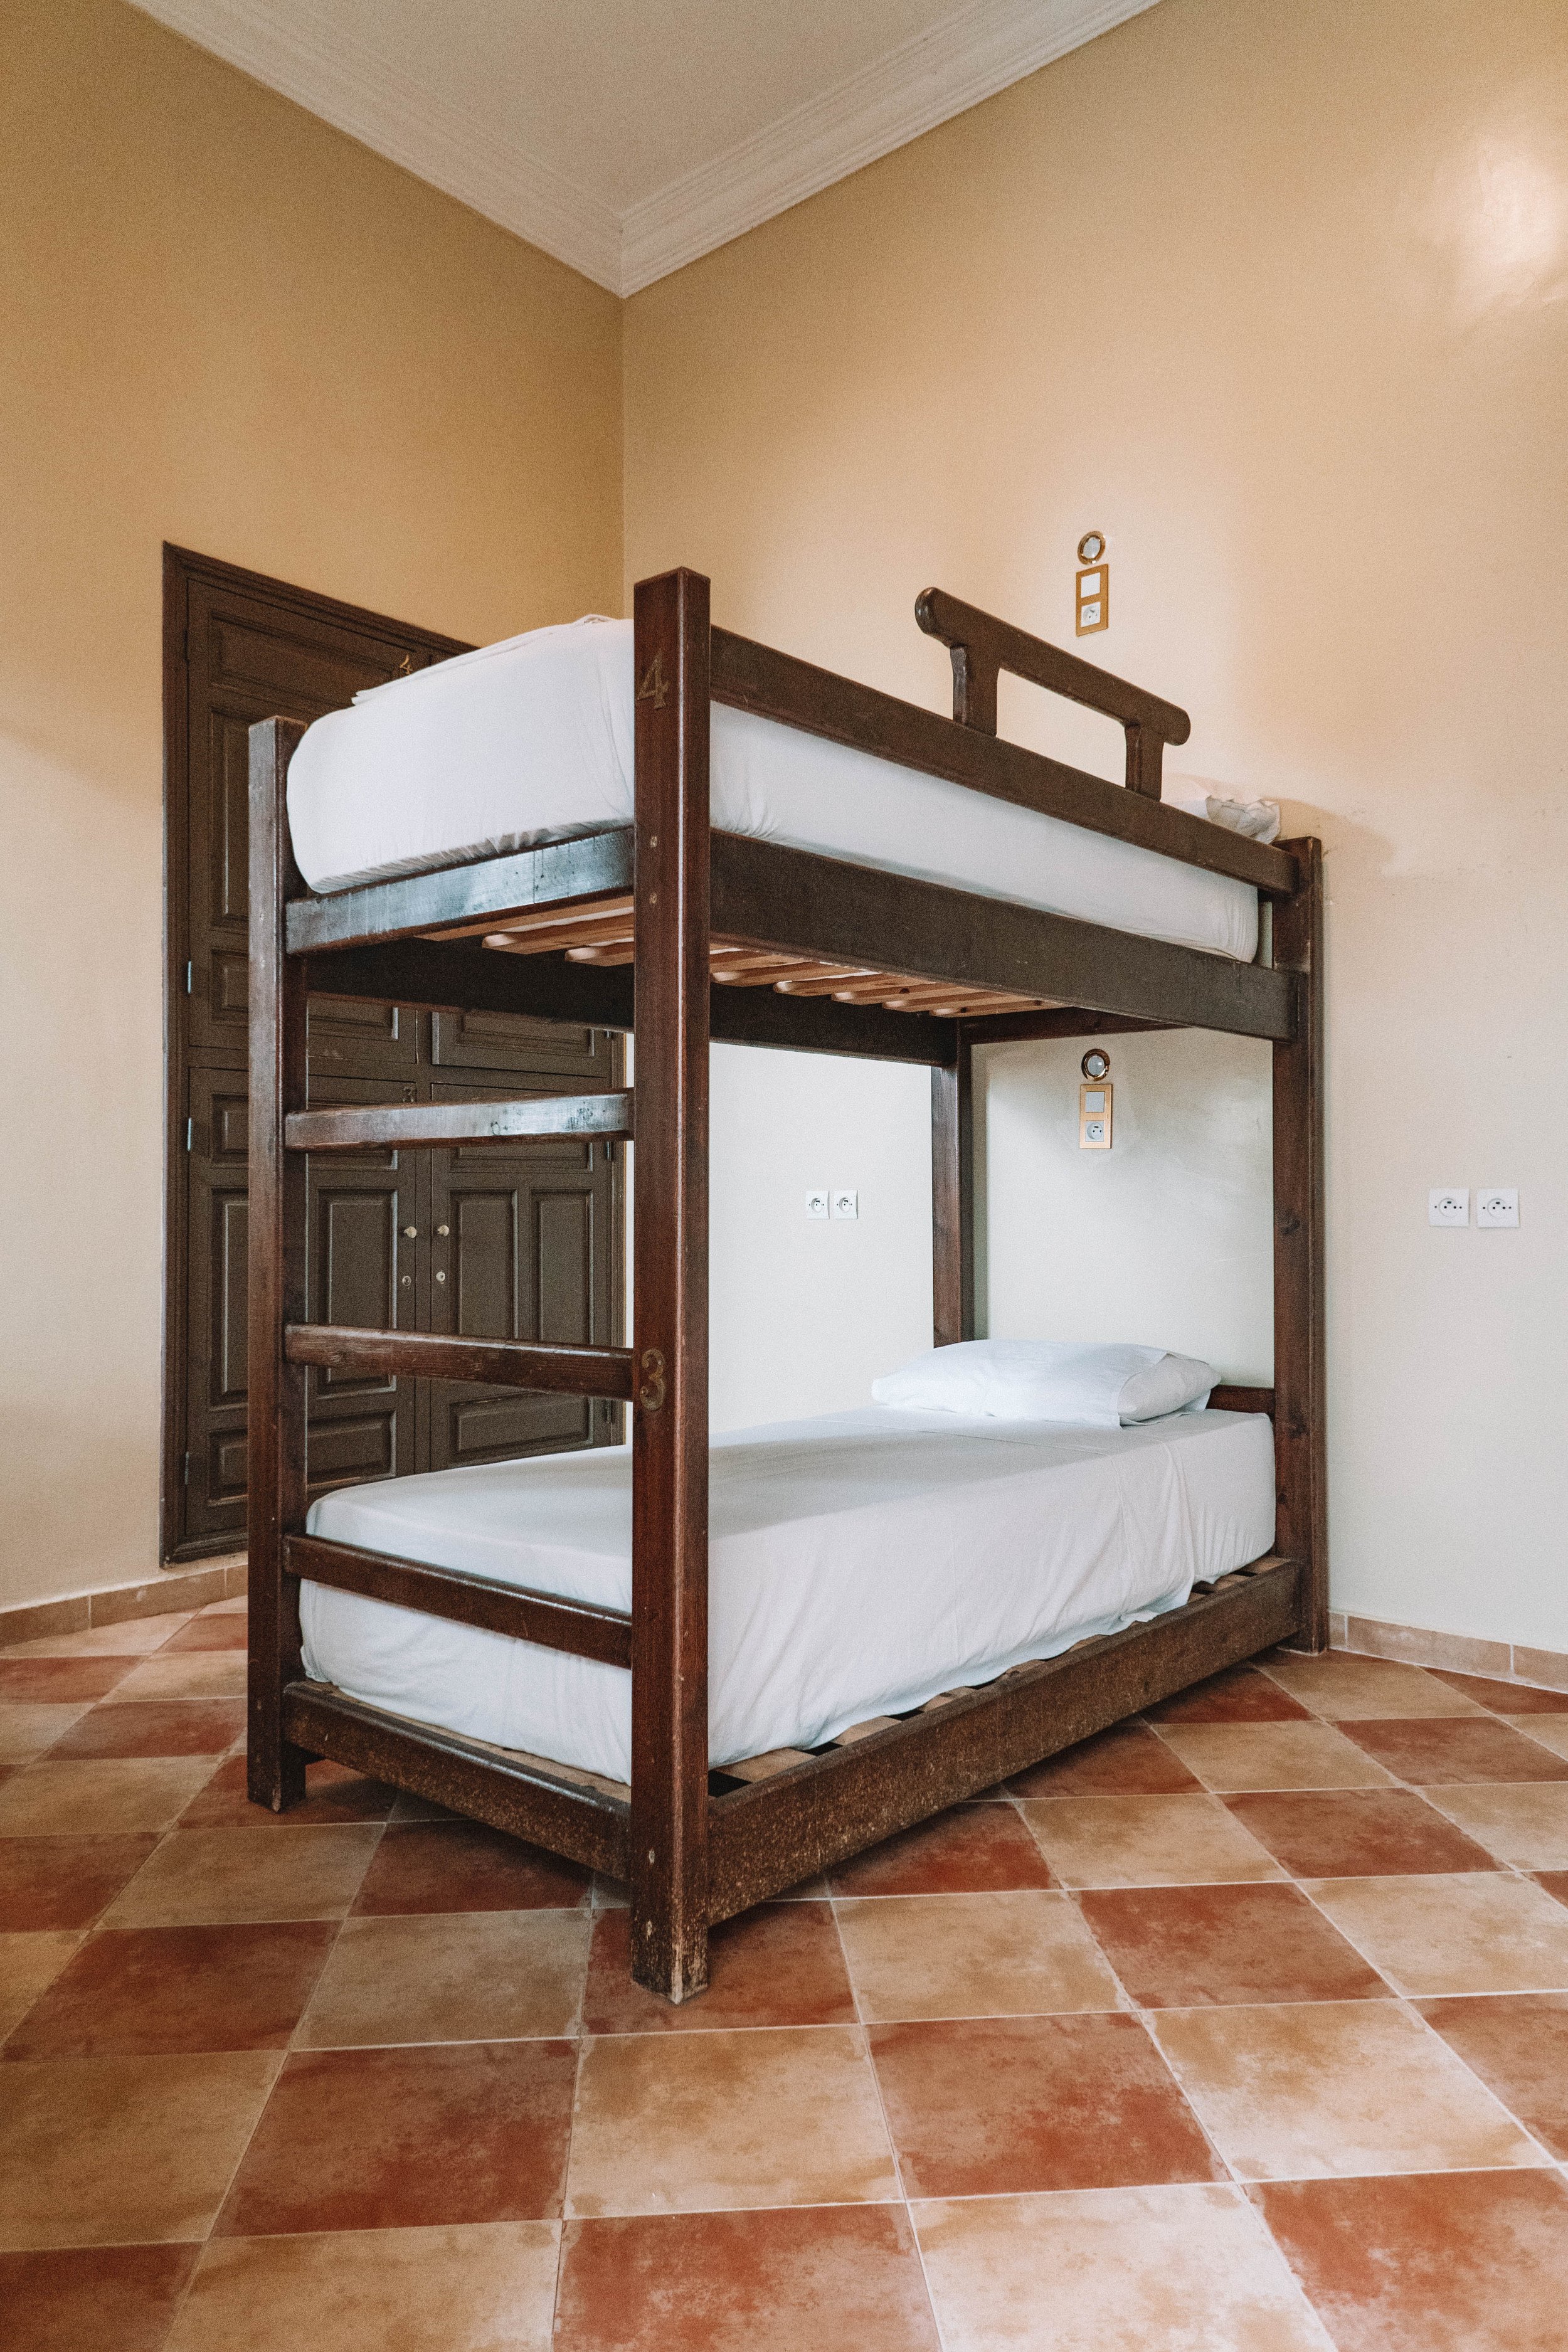 Equity Point Marrakech | Bed in 4-Bed Dormitory Room | 1.jpg